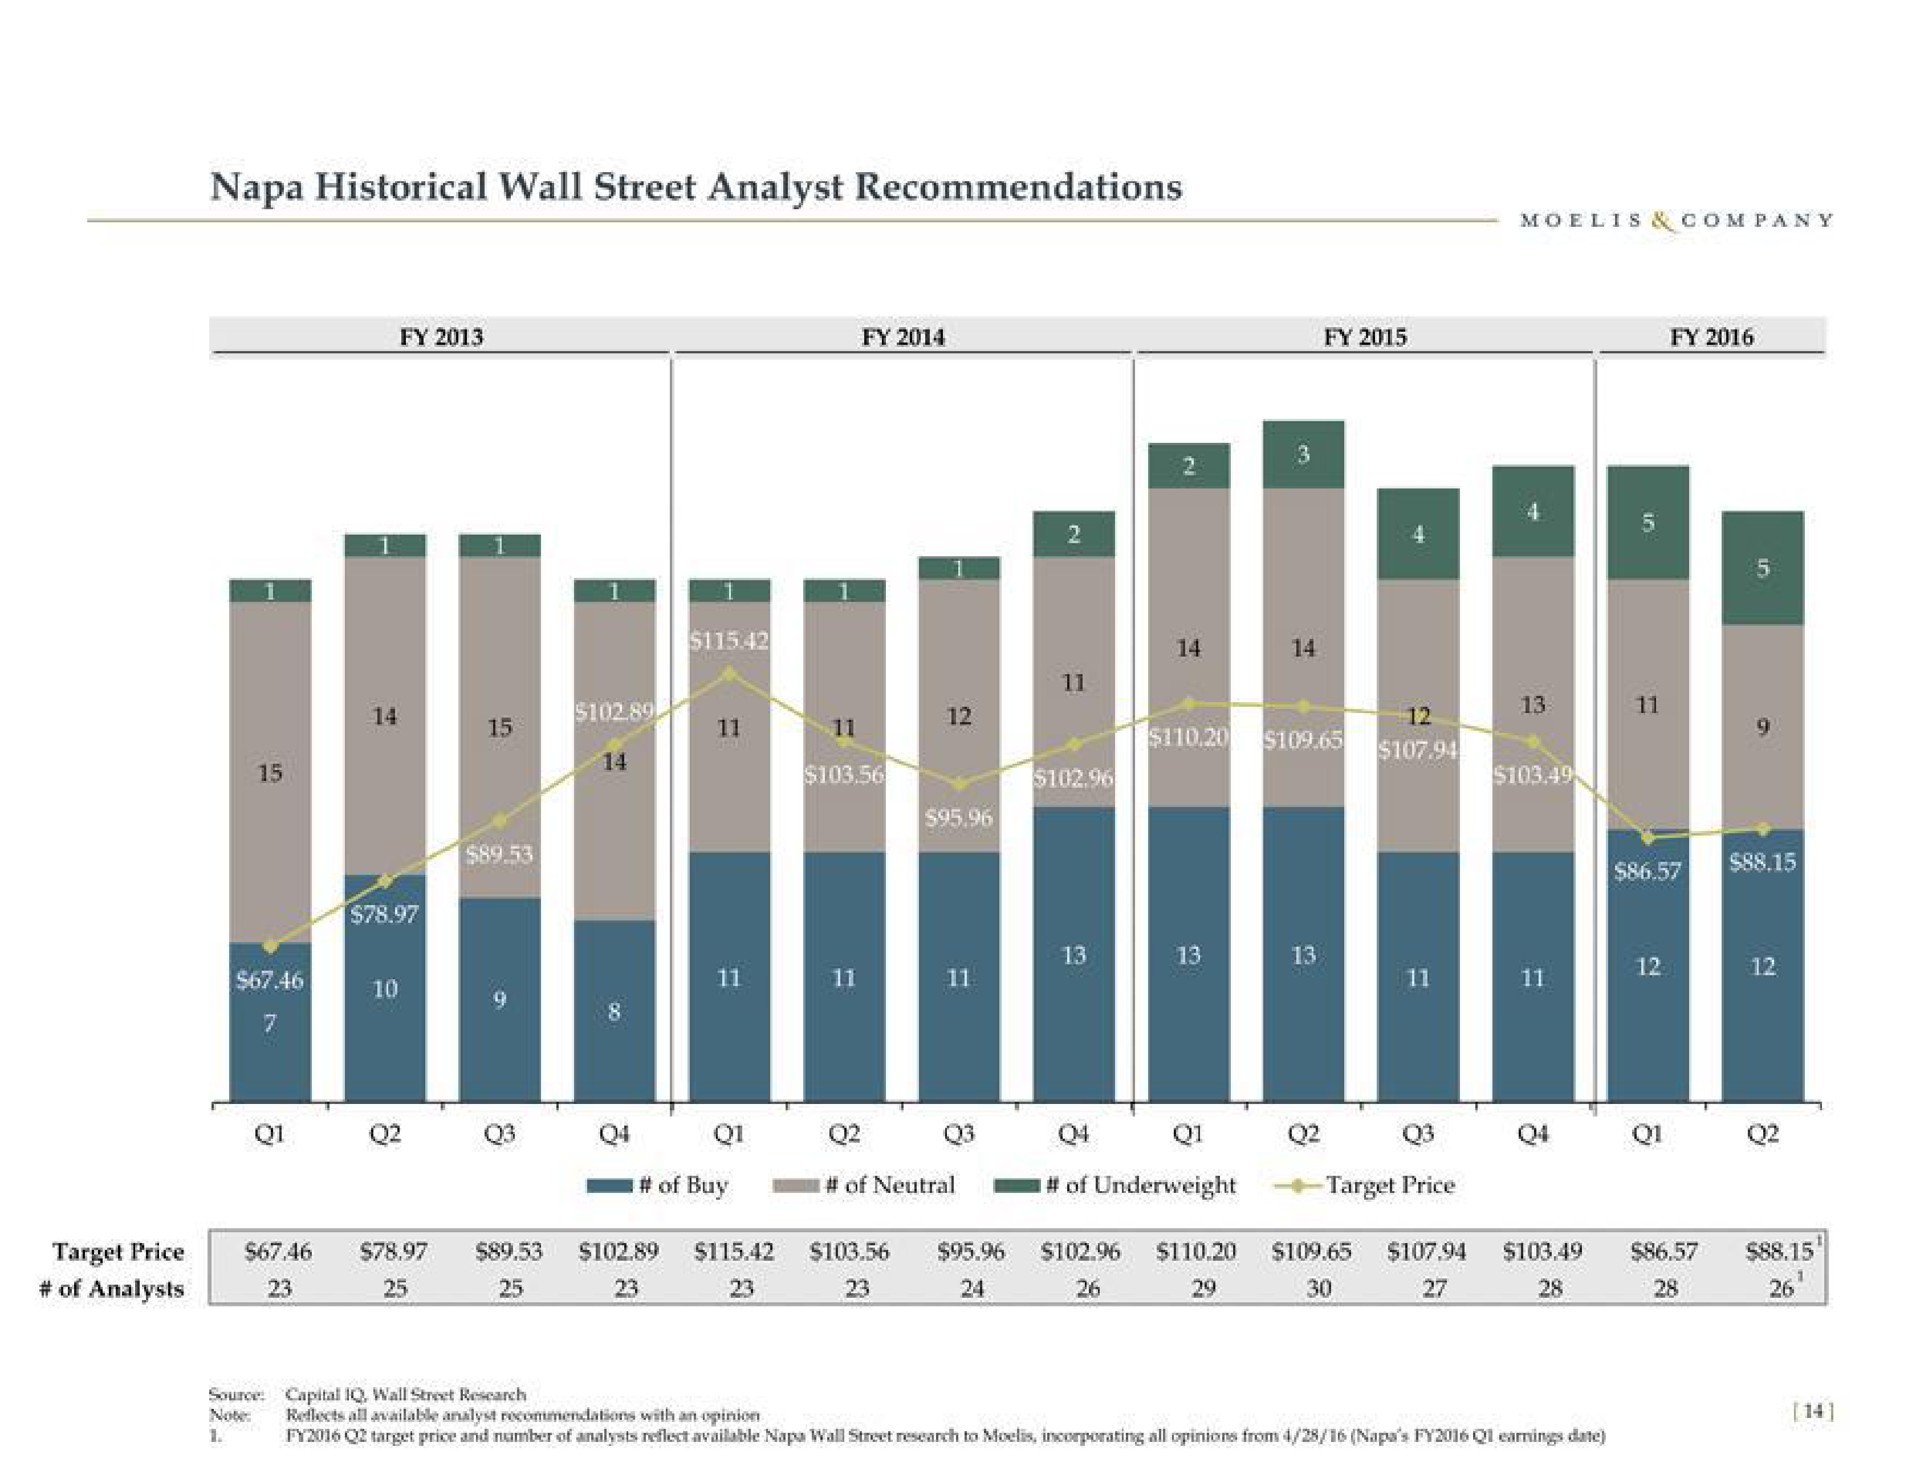 napa historical wall street analyst recommendations steel a on a a | Moelis & Company